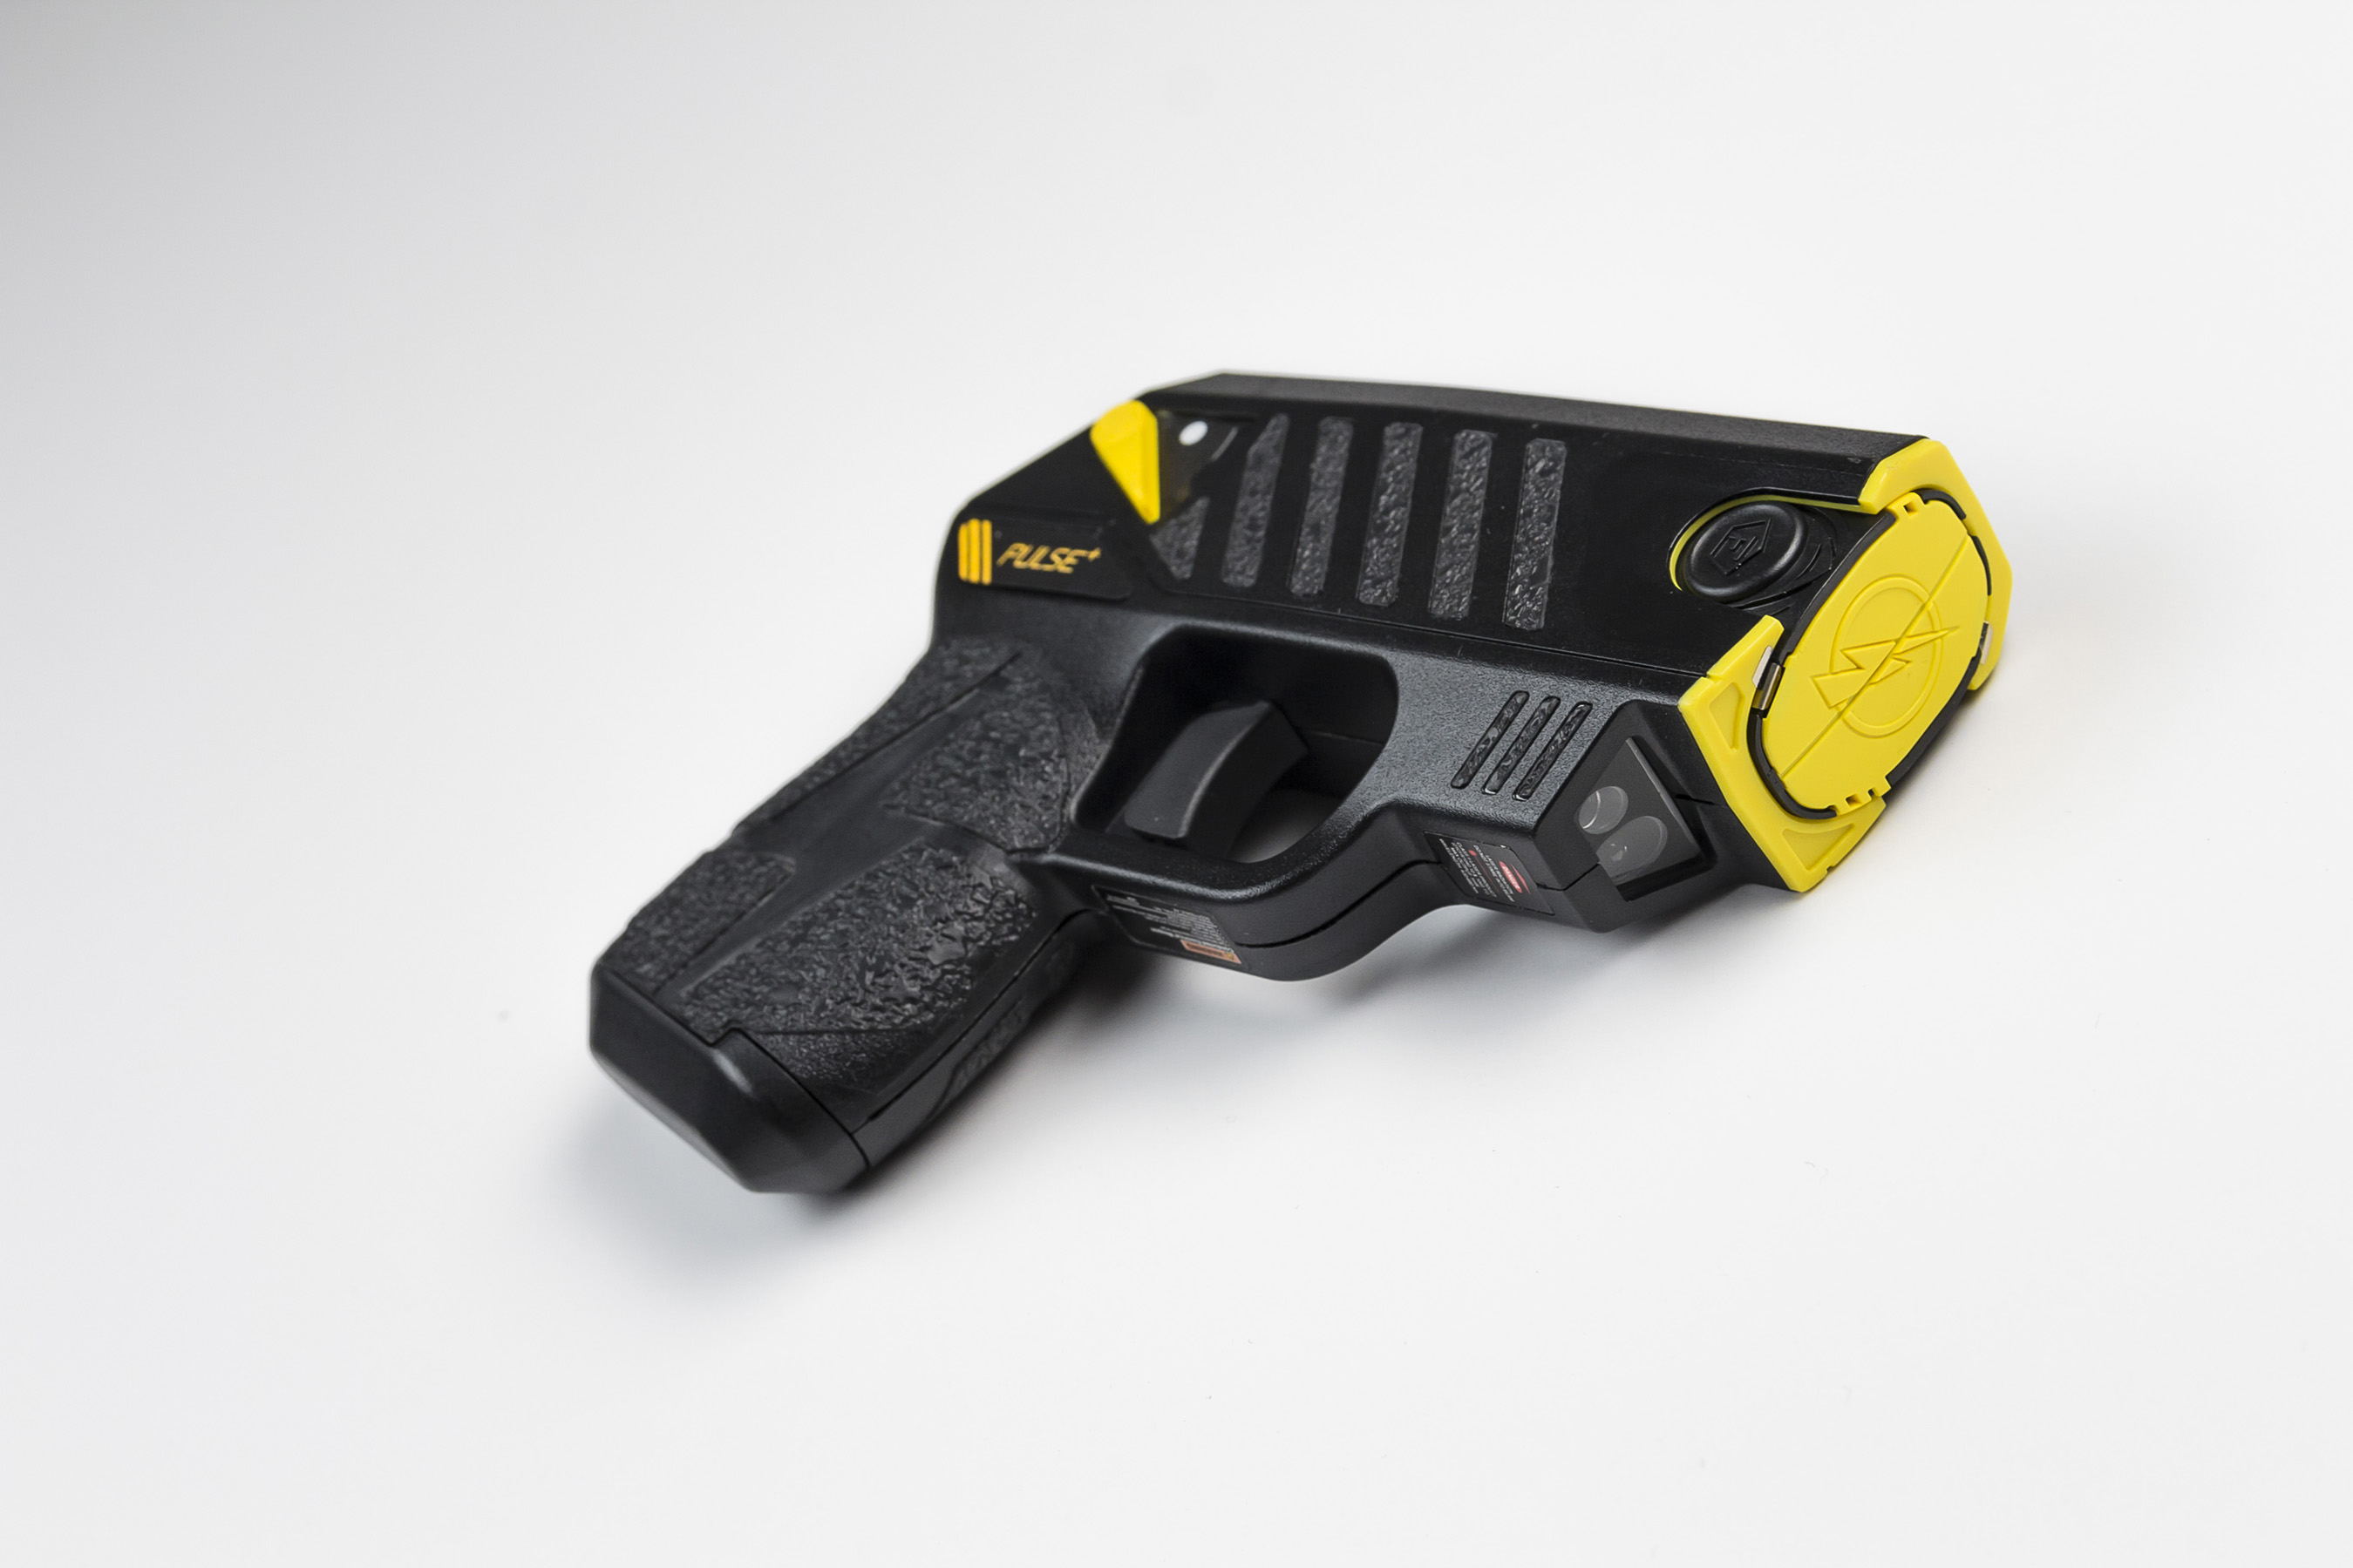 TASER Self-Defense Launches First Consumer TASER Device to Notify 911 When Deployed; Announces Partnership with Connected Safety Company Noonlight